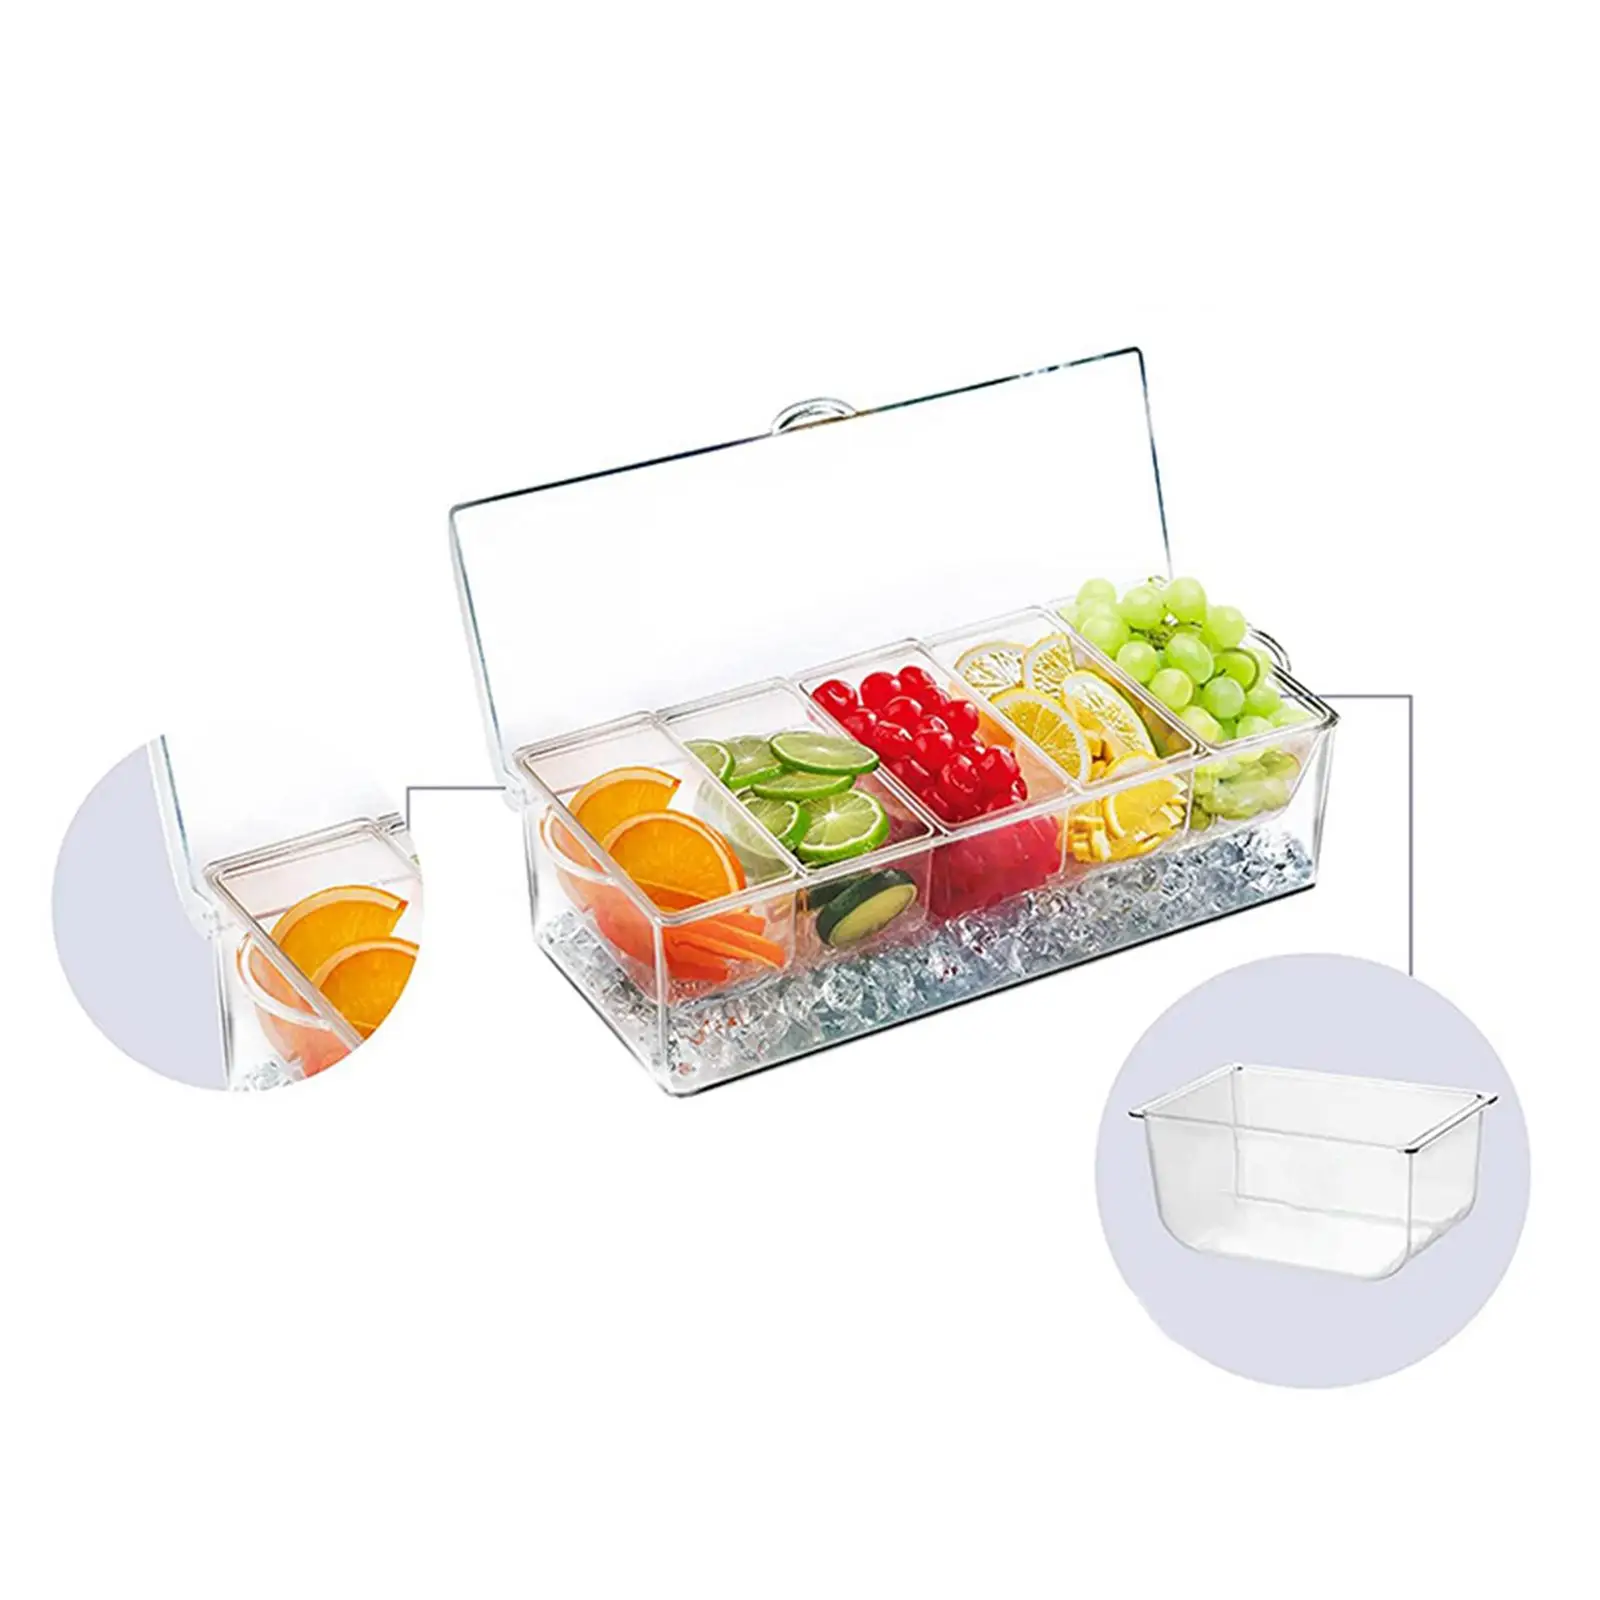 Chilled Condiment Server Caddy 5 Compartment Container for Keeping Fresh